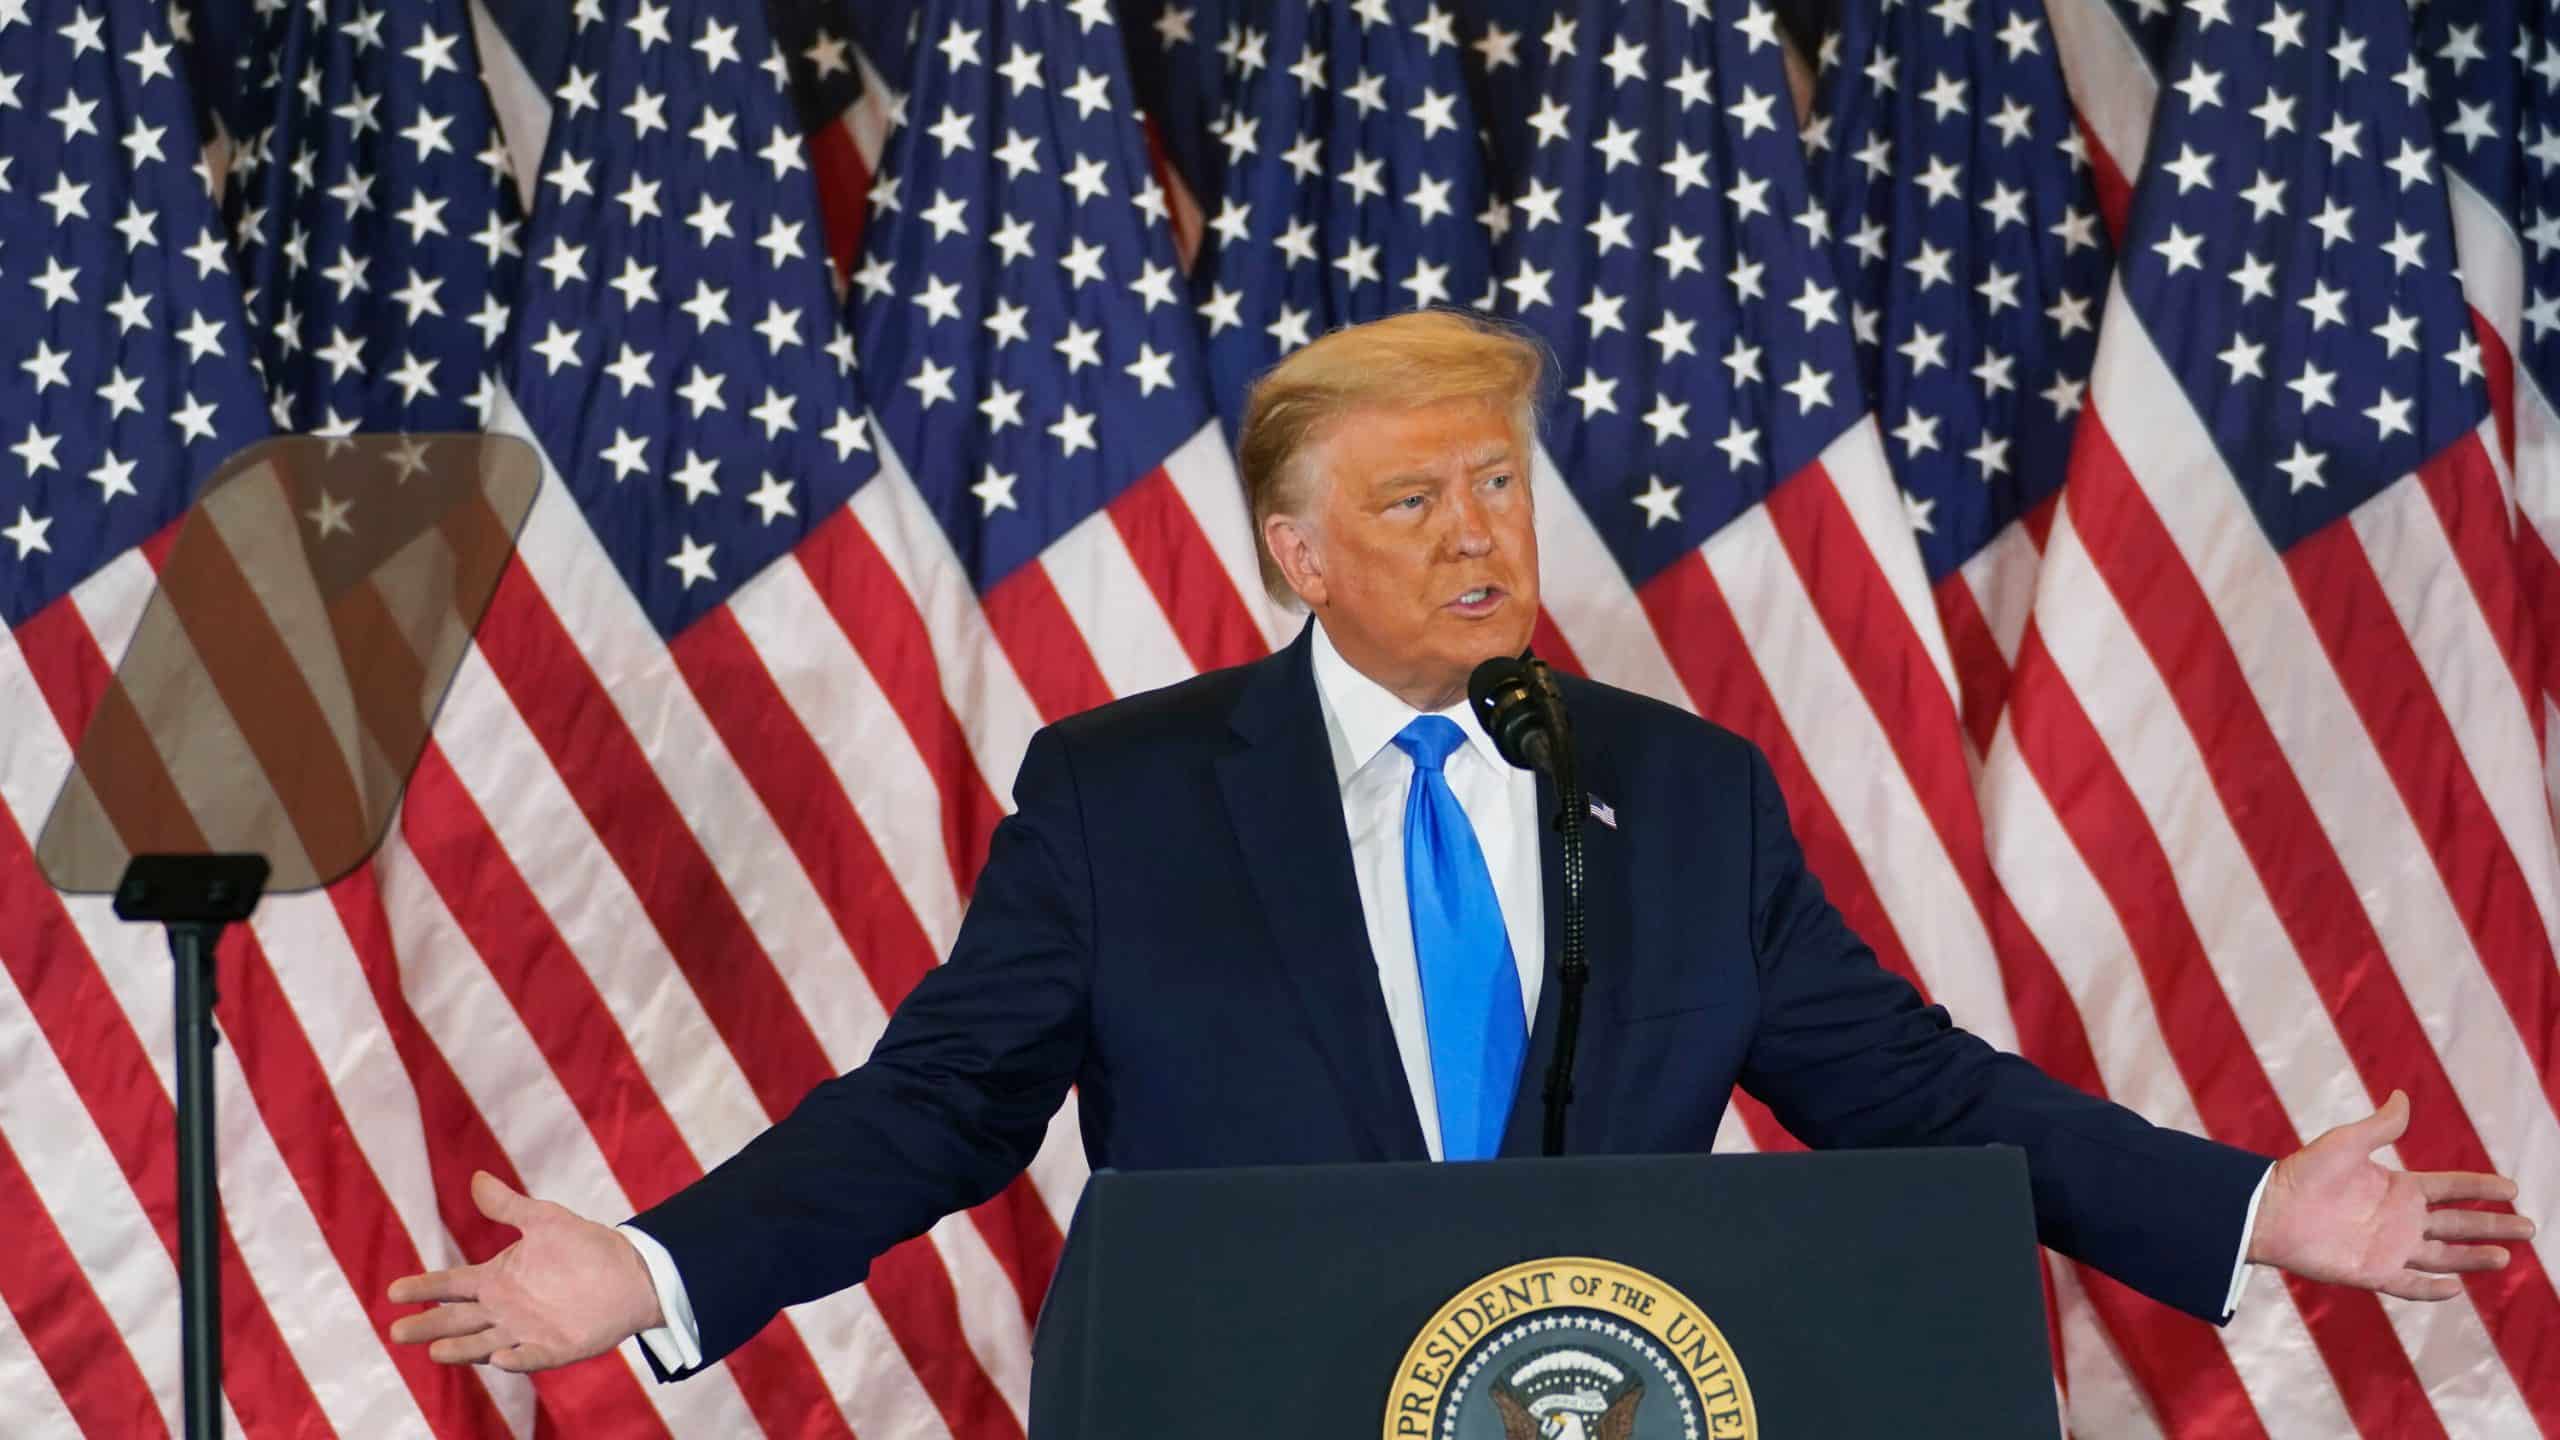 Former president Donald Trump standing at a podium in front of American flags.